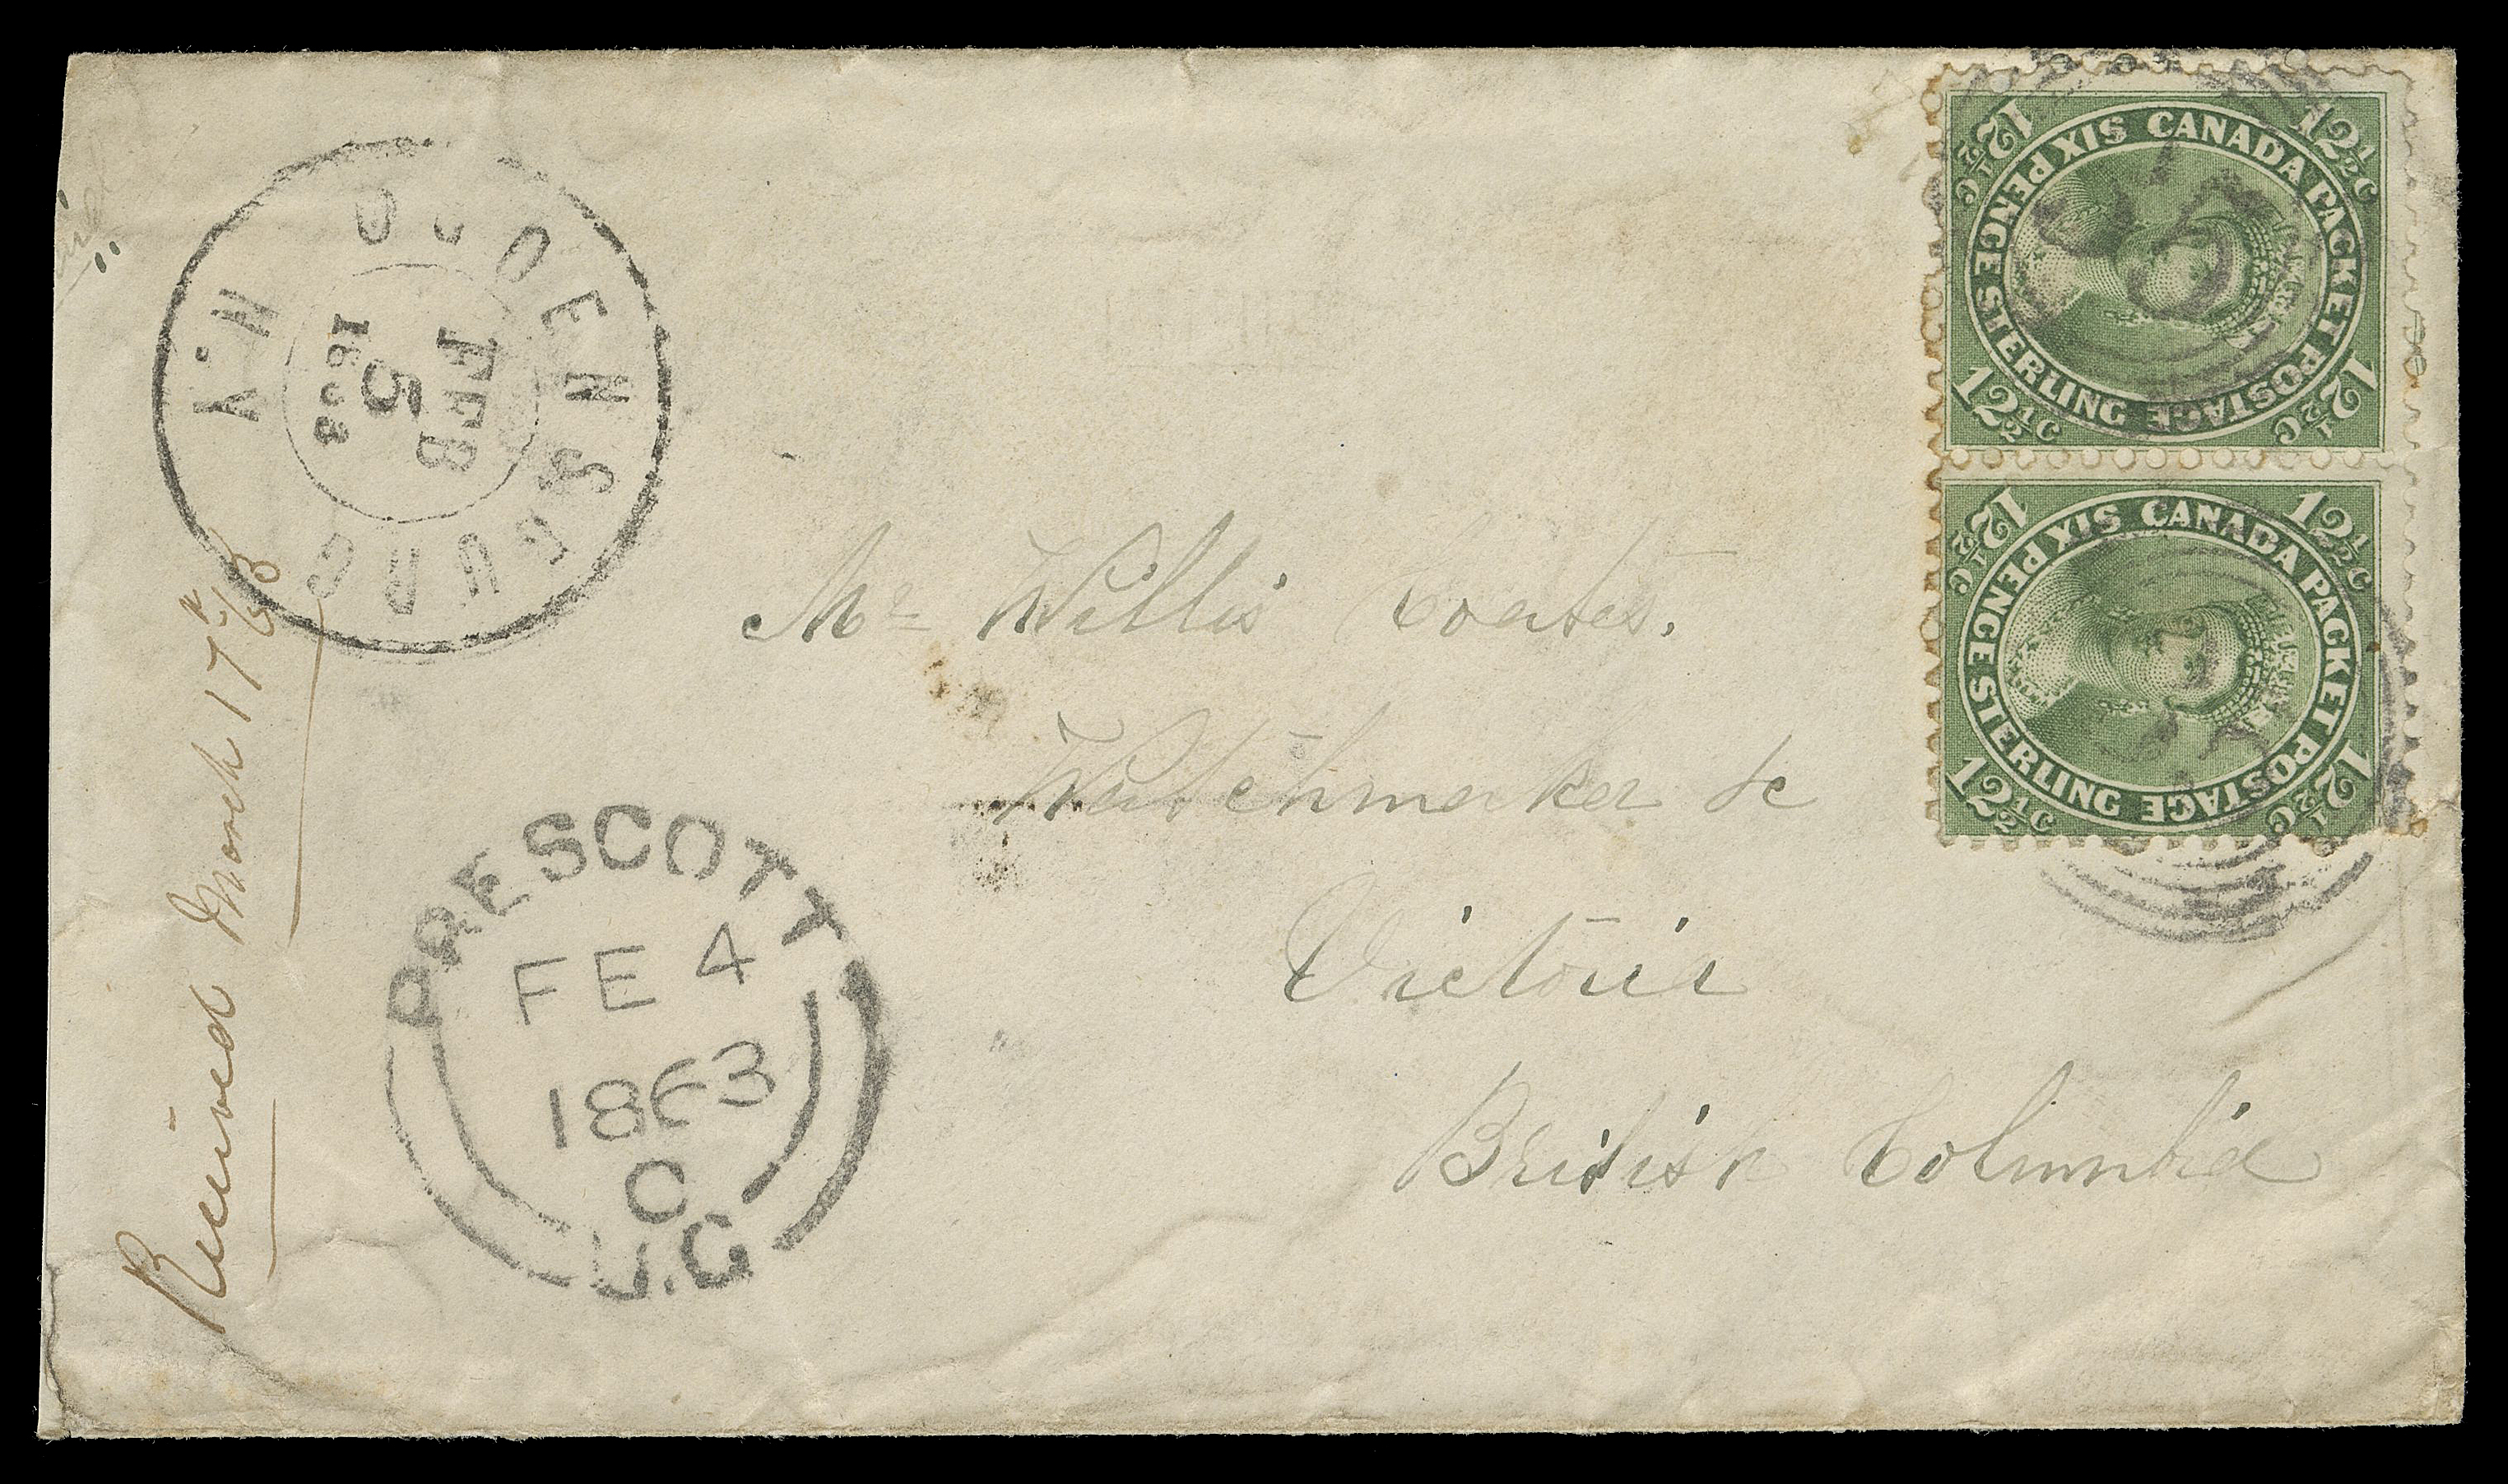 SEVEN AND ONE HALF PENCE AND TWELVE AND ONE HALF CENTS  1863 (February 4) Cover from Prescott, U.C. to Victoria, Colony  of Vancouver Island, bearing a horizontal pair of 12½c olive  green, perf 11¾, nicely centered, light crease along perfs of  right stamp, nicely tied by four-ring 